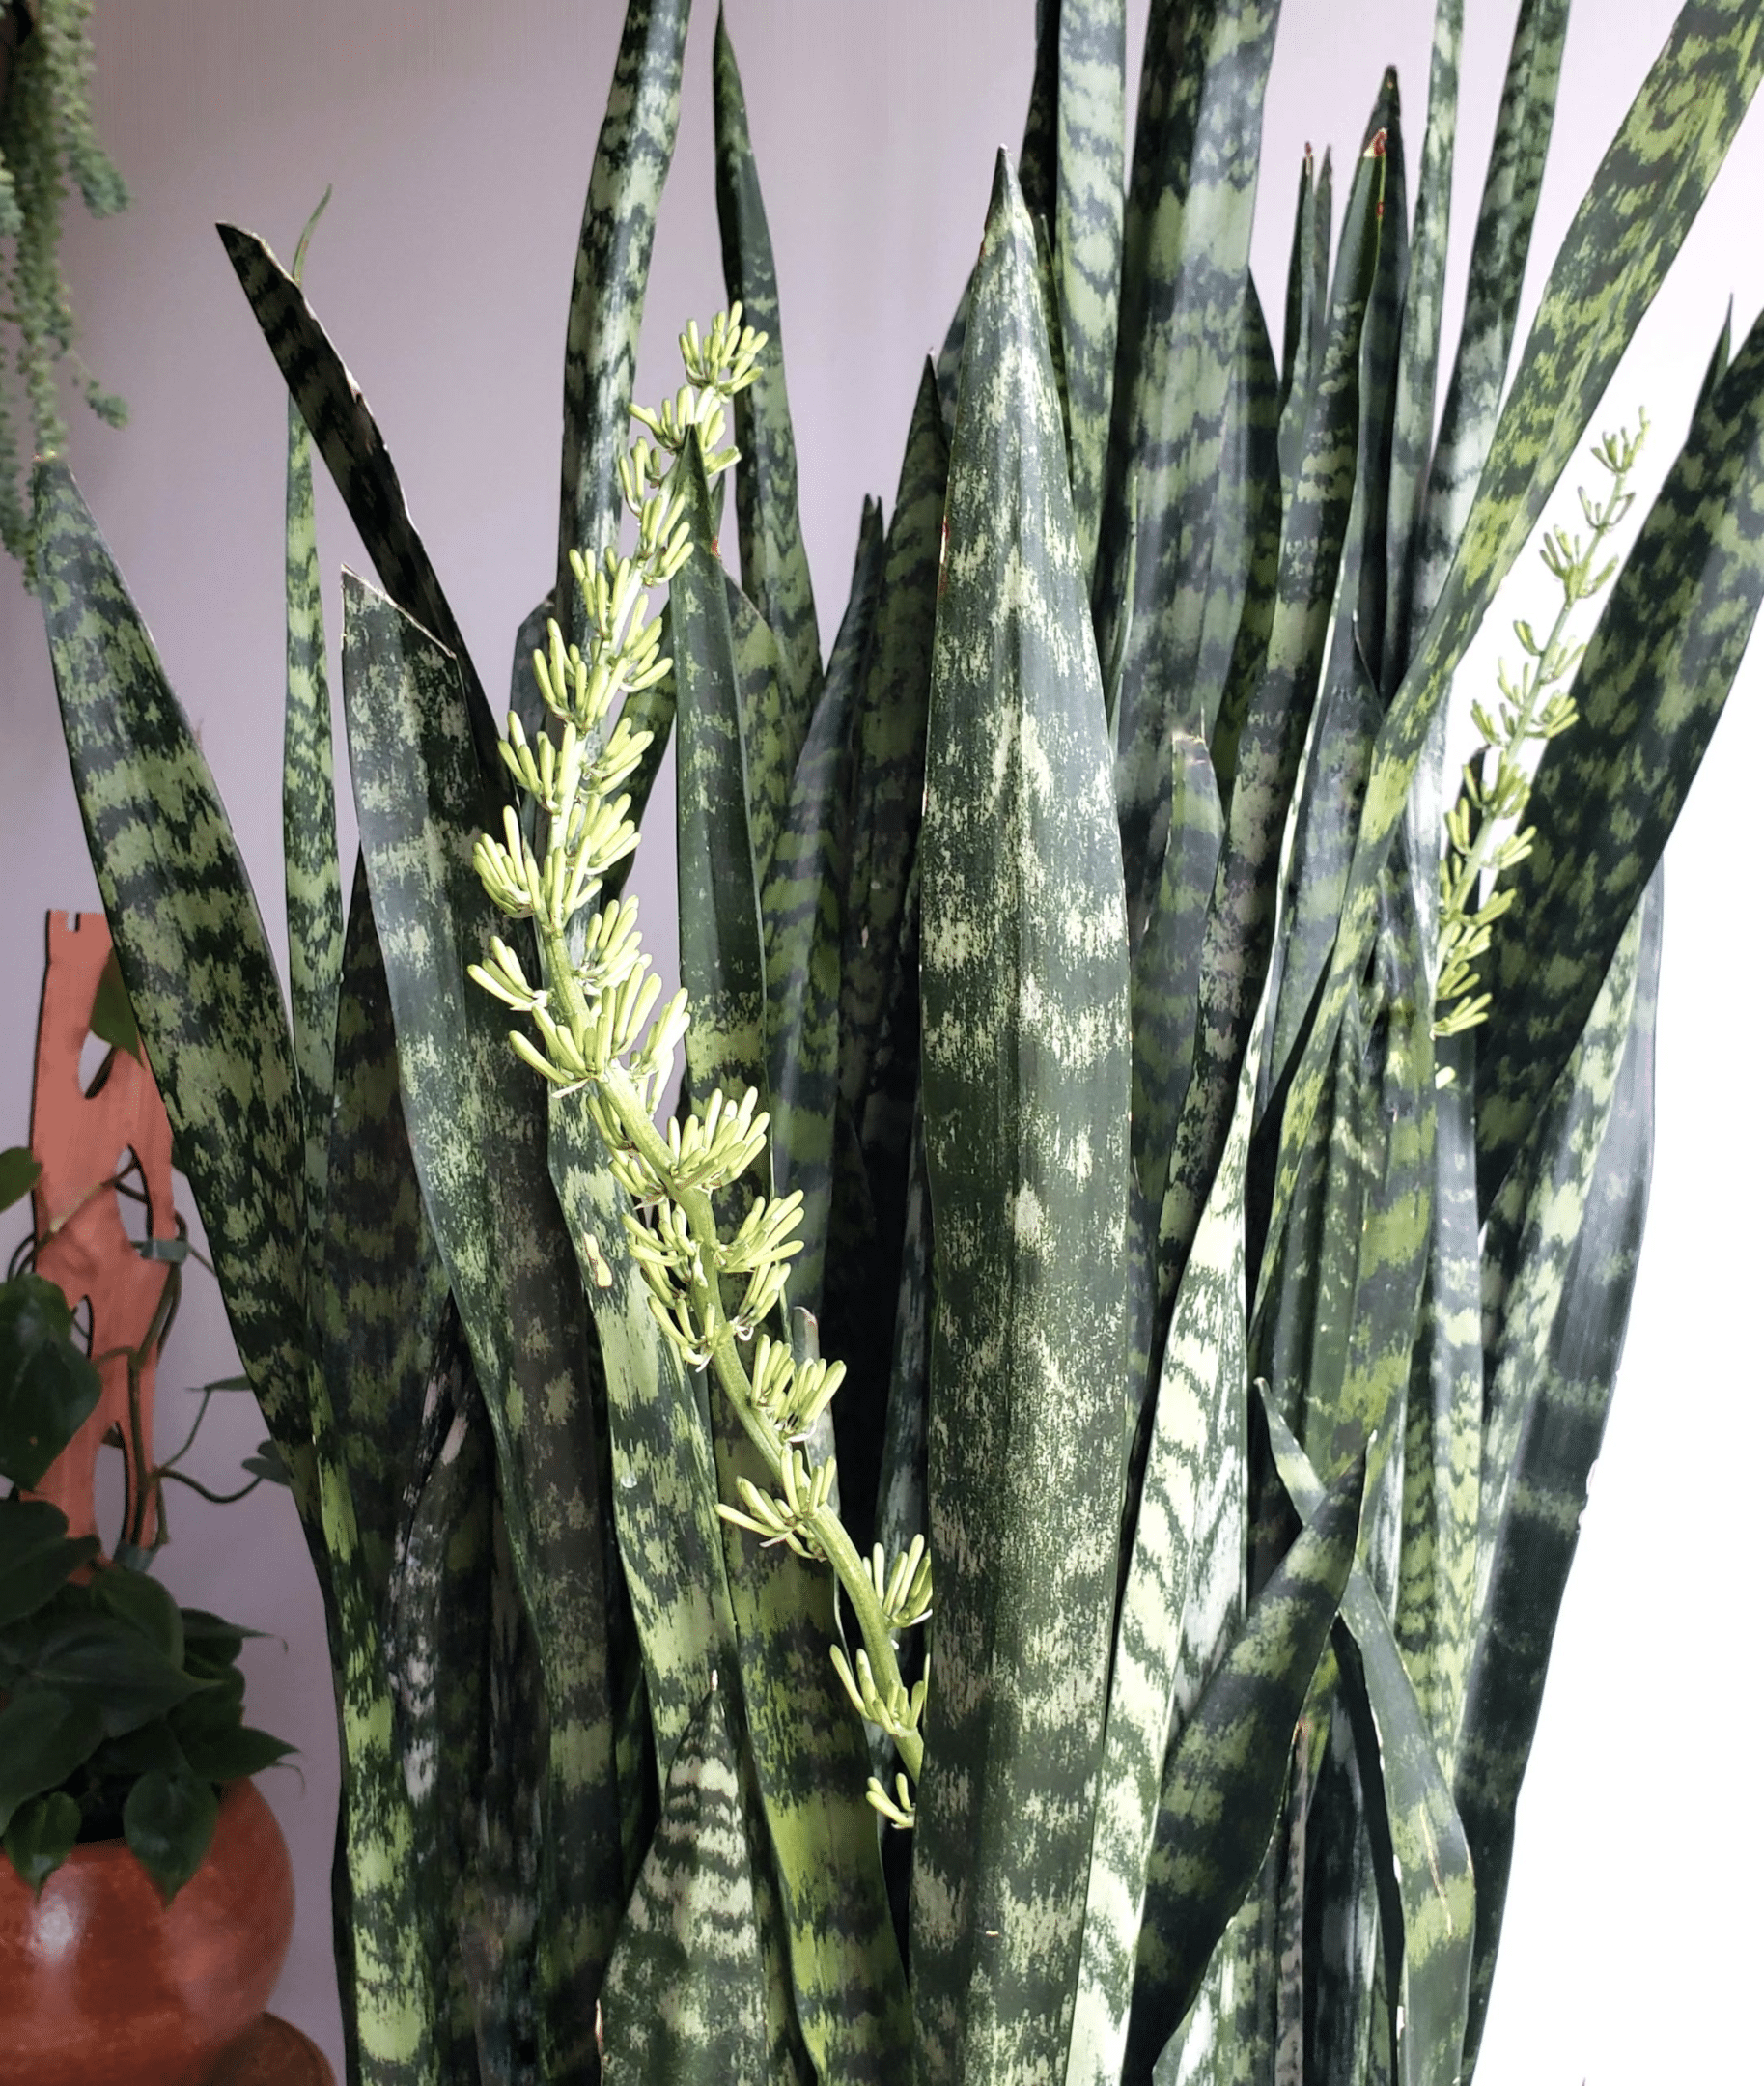 Snake plant with its neat appearance and white flowers